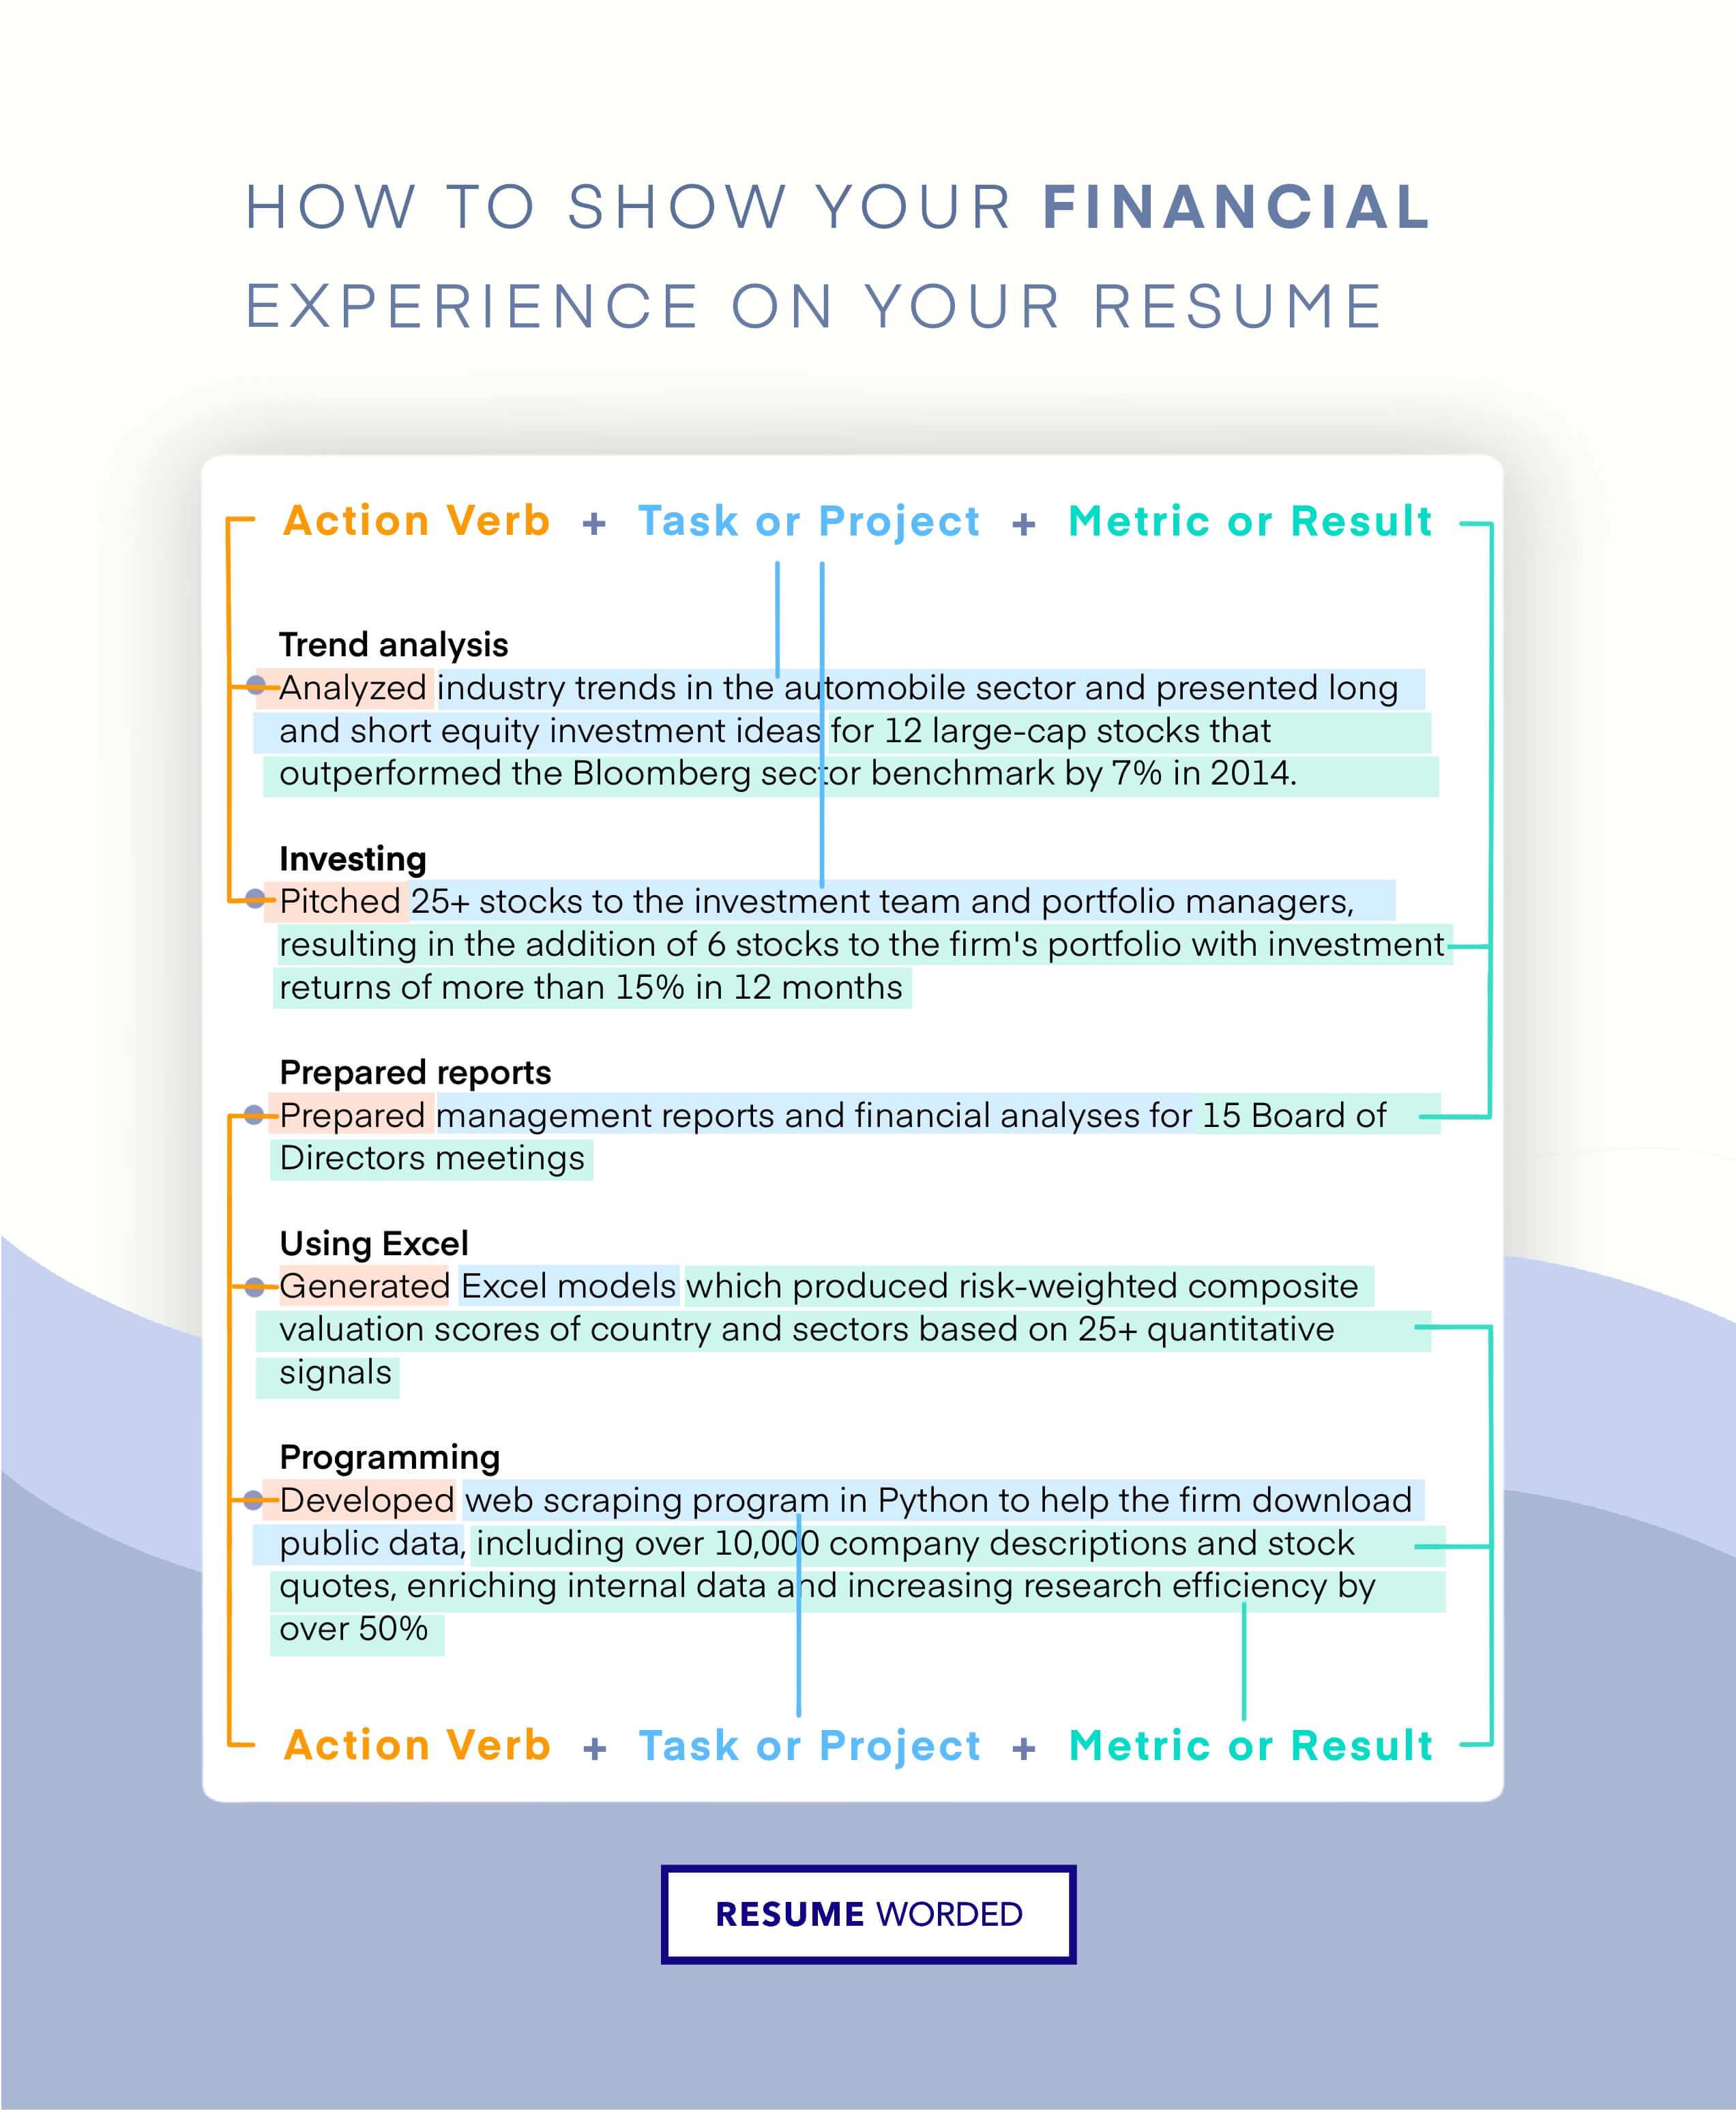 Focus on finance skills in the skills section. - Director of Finance Resume